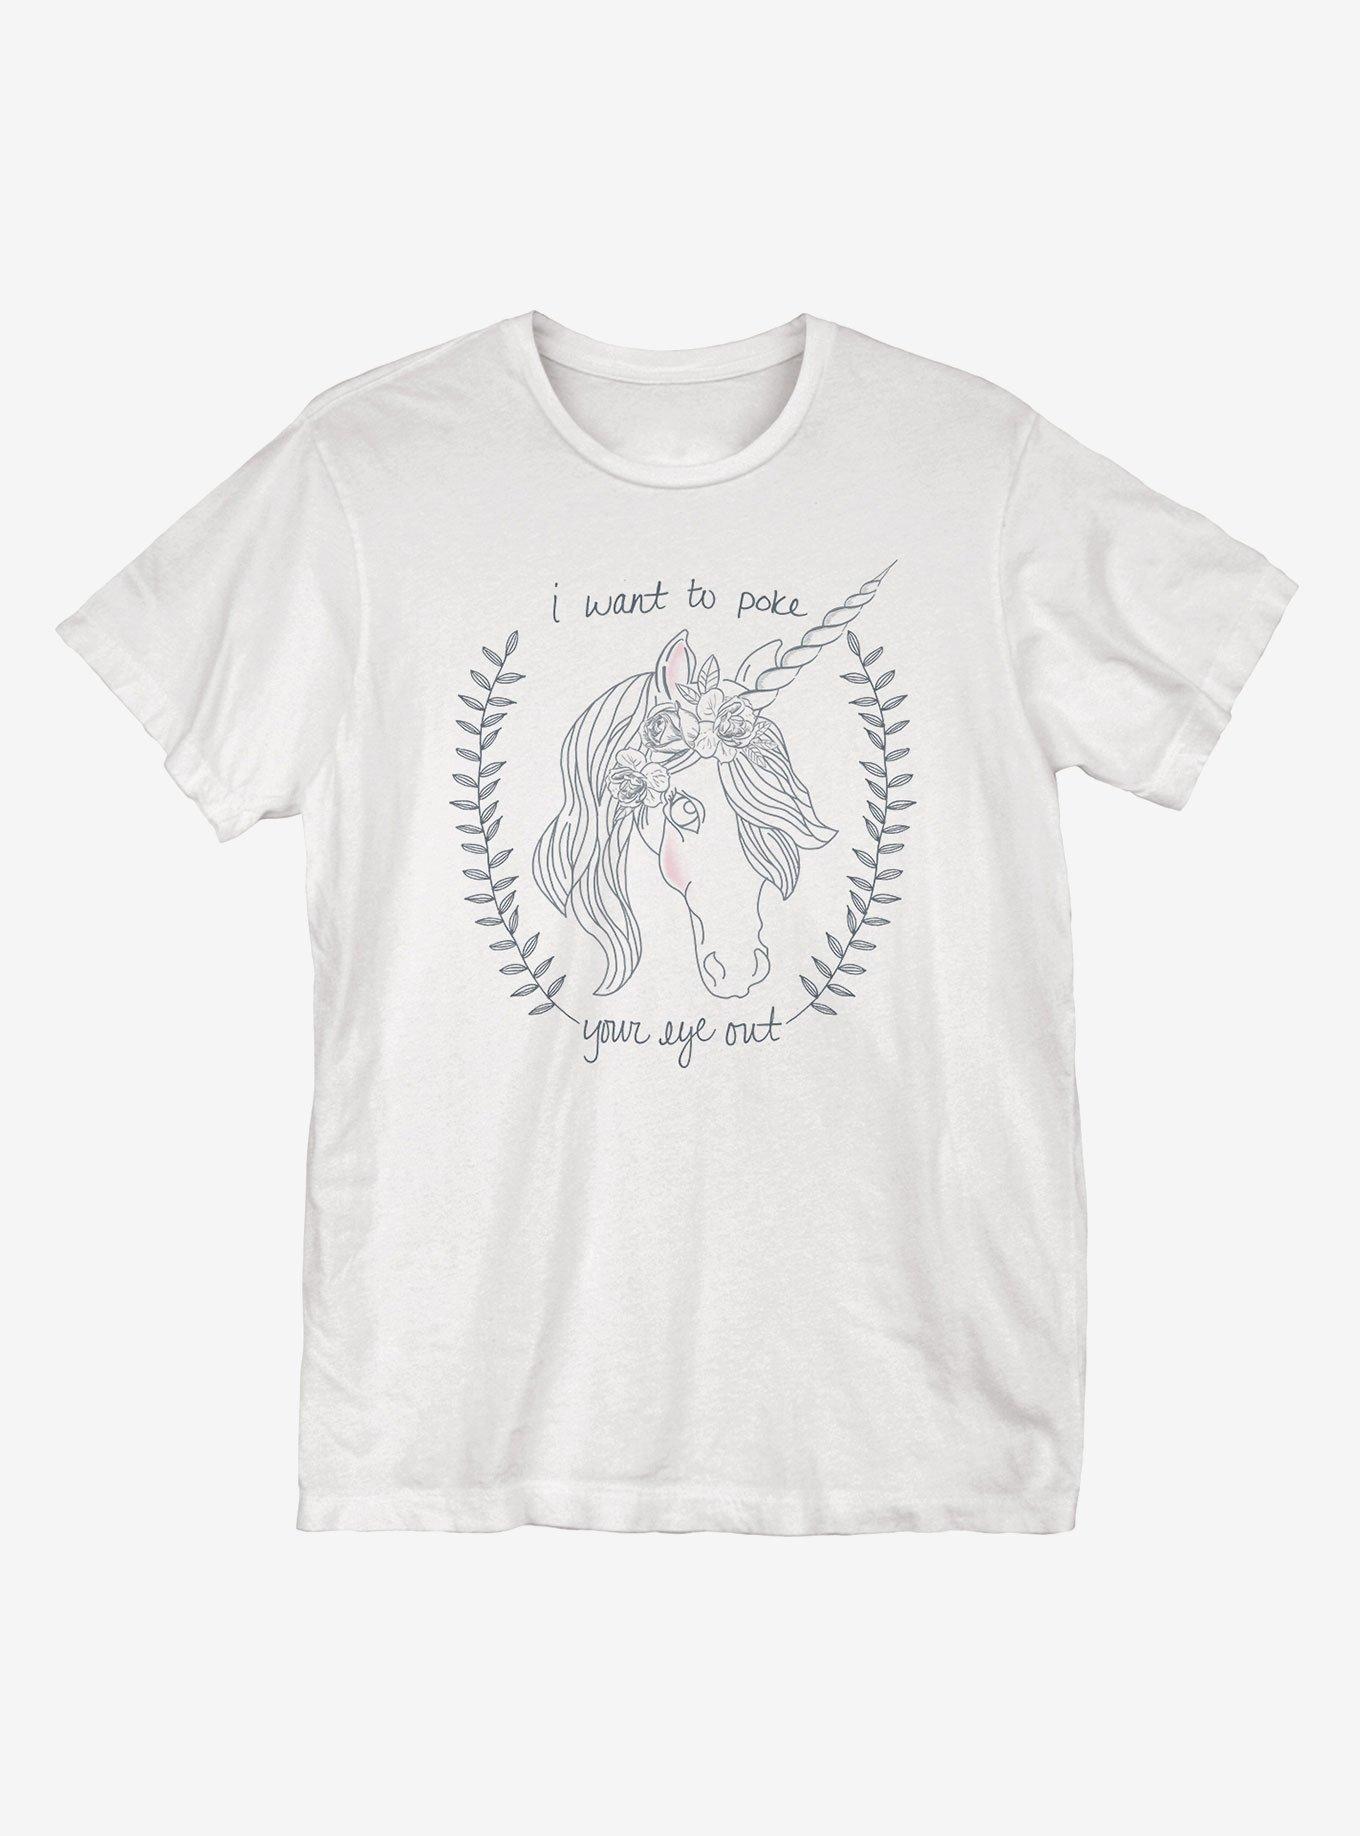 Your Eye Out T-Shirt, WHITE, hi-res